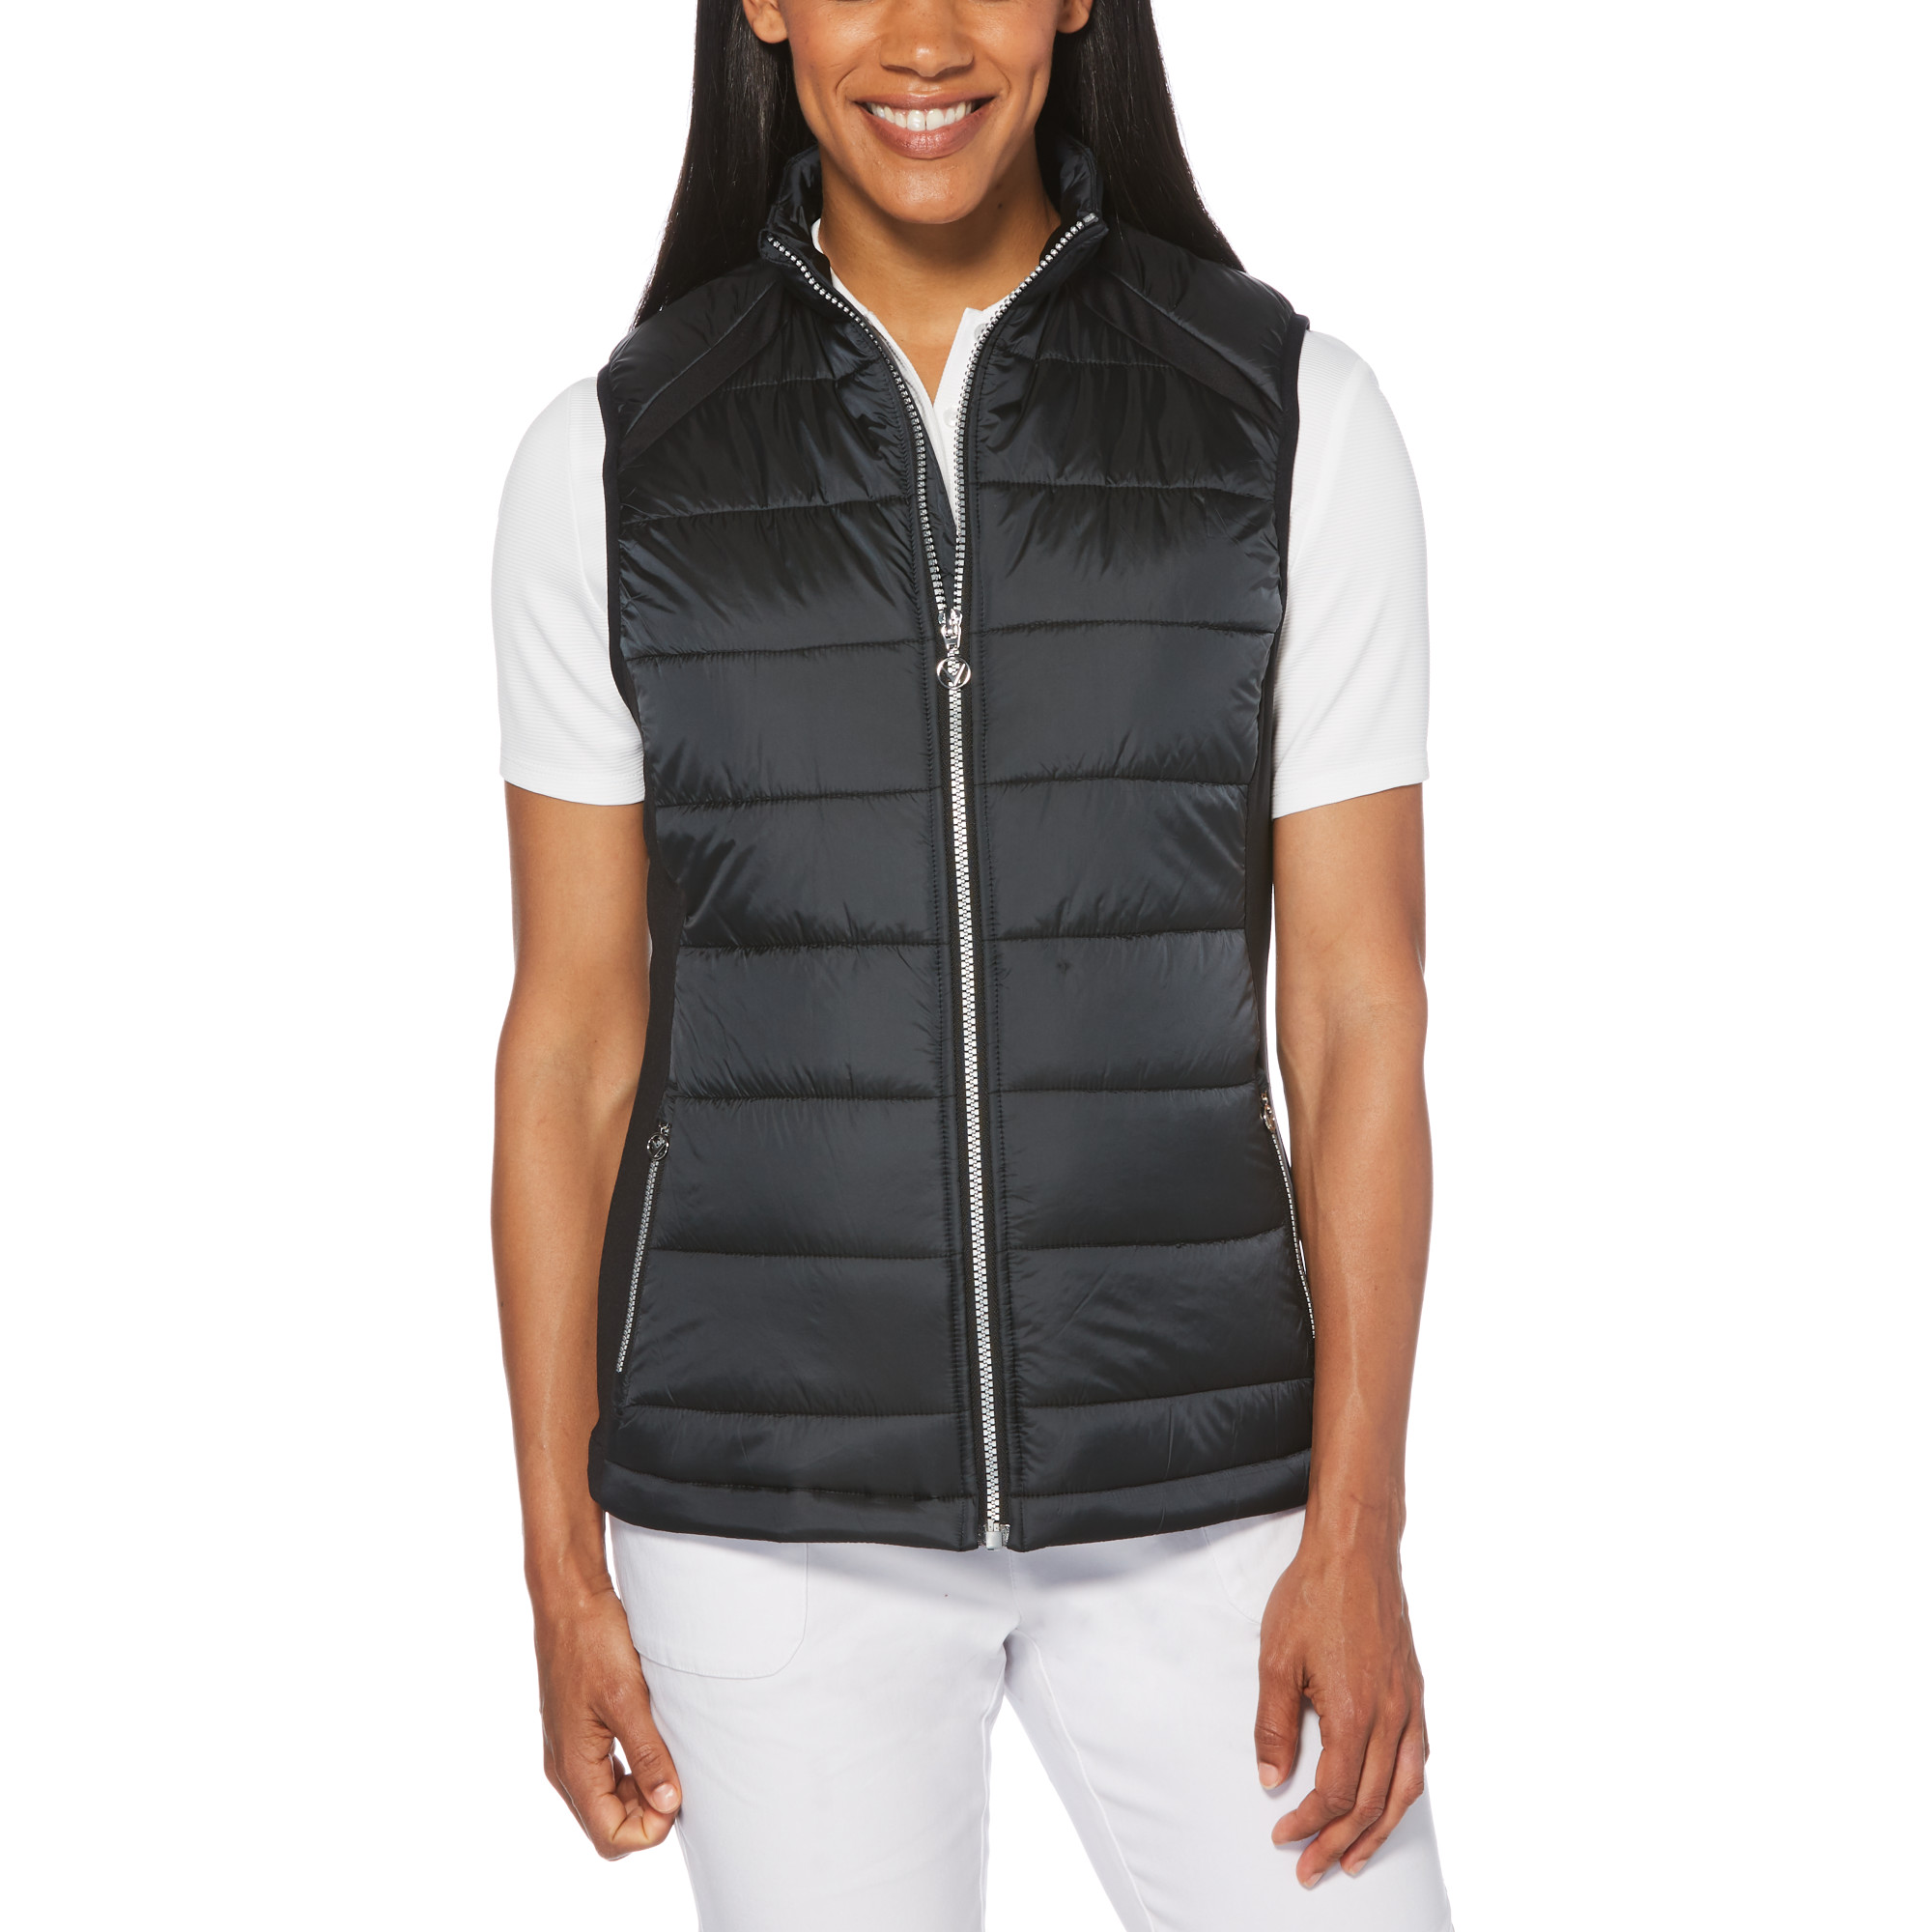 Callaway Womens Performance Mix Media Puffer Vest with Knit Side Panels